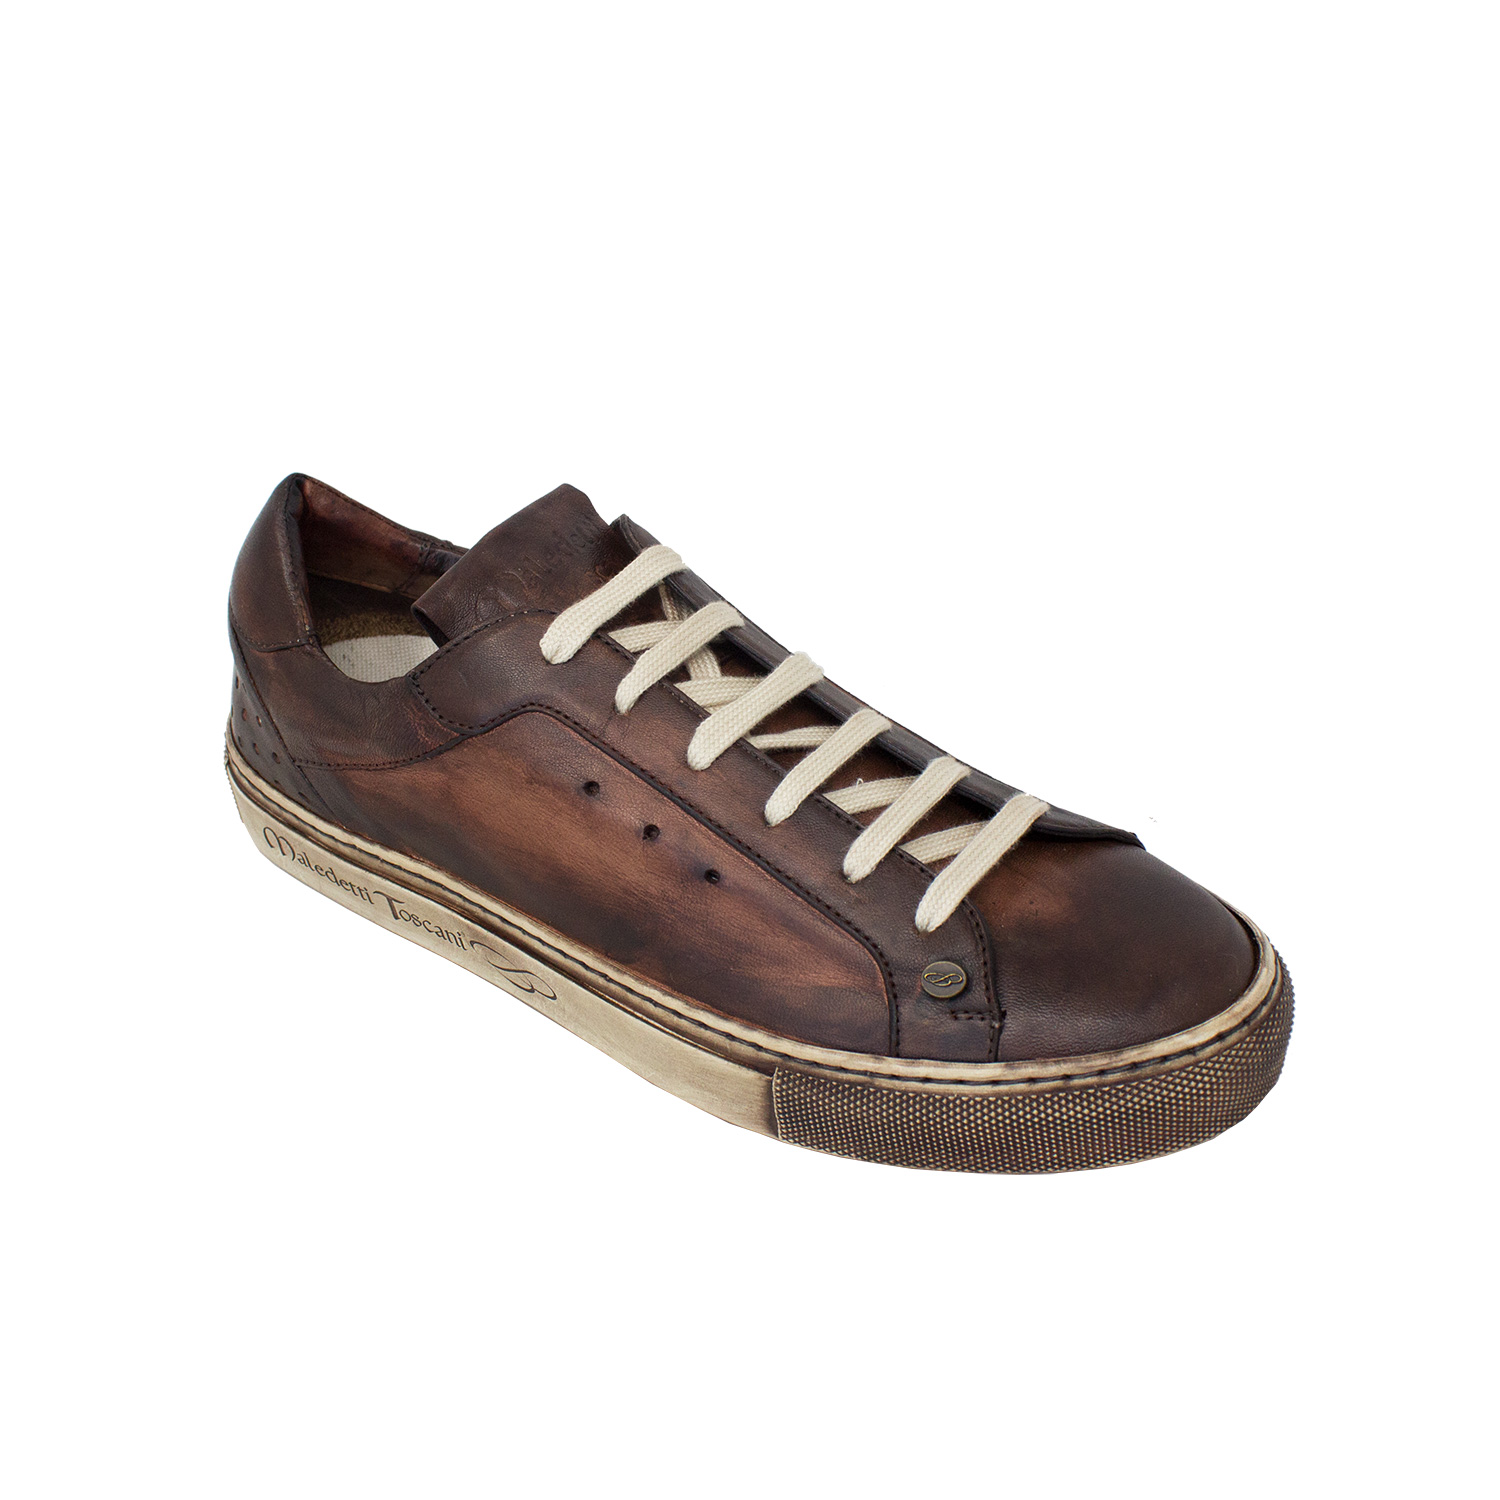 Leather Sneakers. The high-top sneaker is made of vegetable-tanned sheep leather.